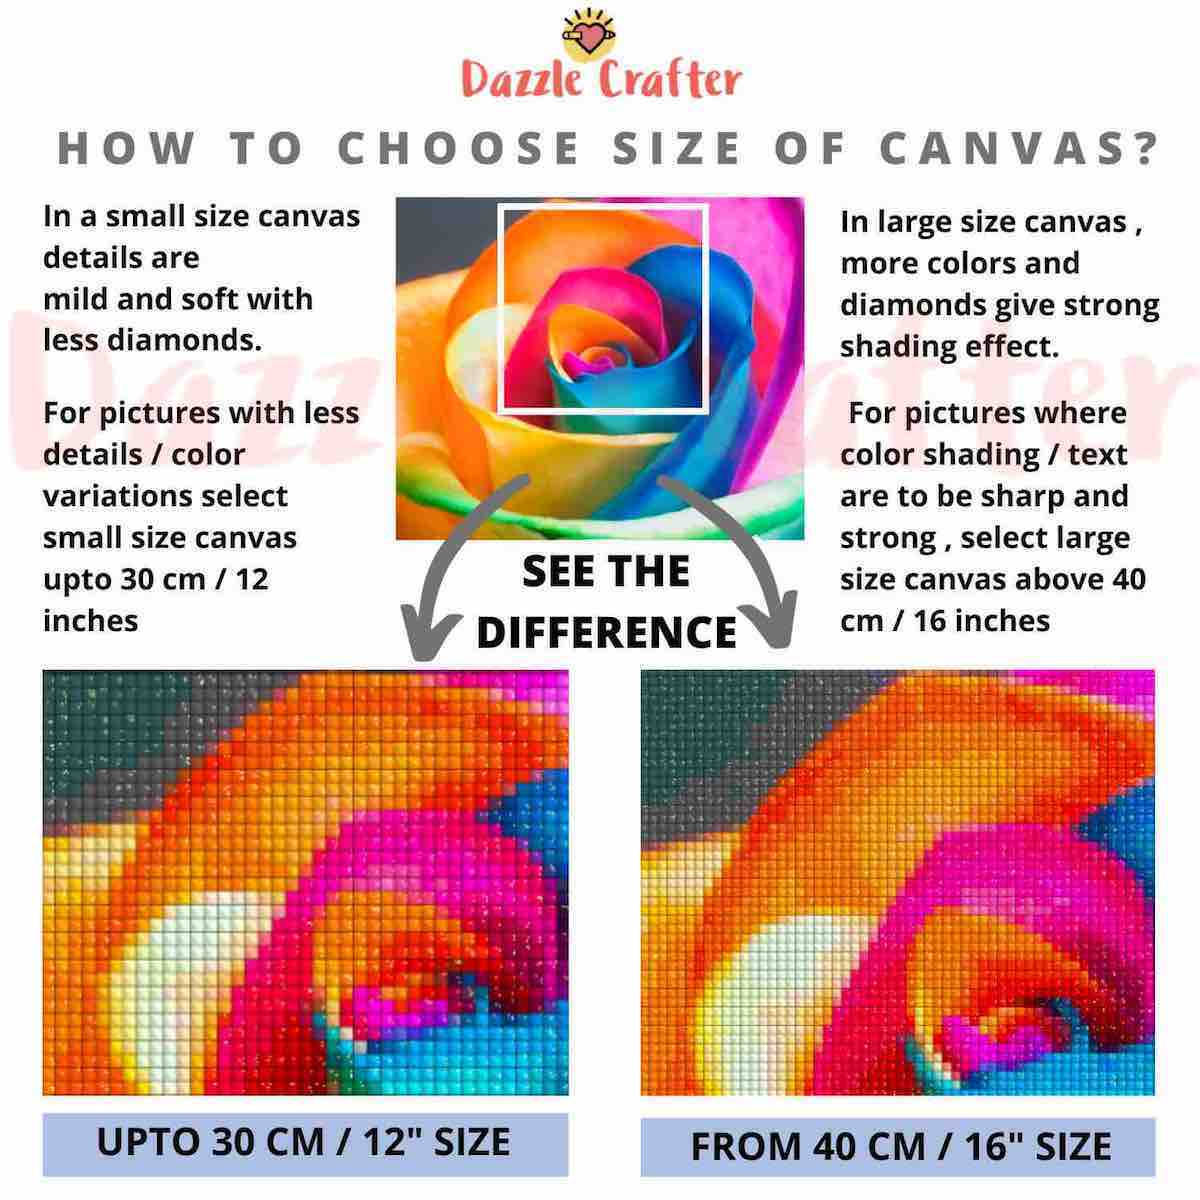 HOW TO CHOOSE CANVAS SIZE FOR DIAMOND PAINTING